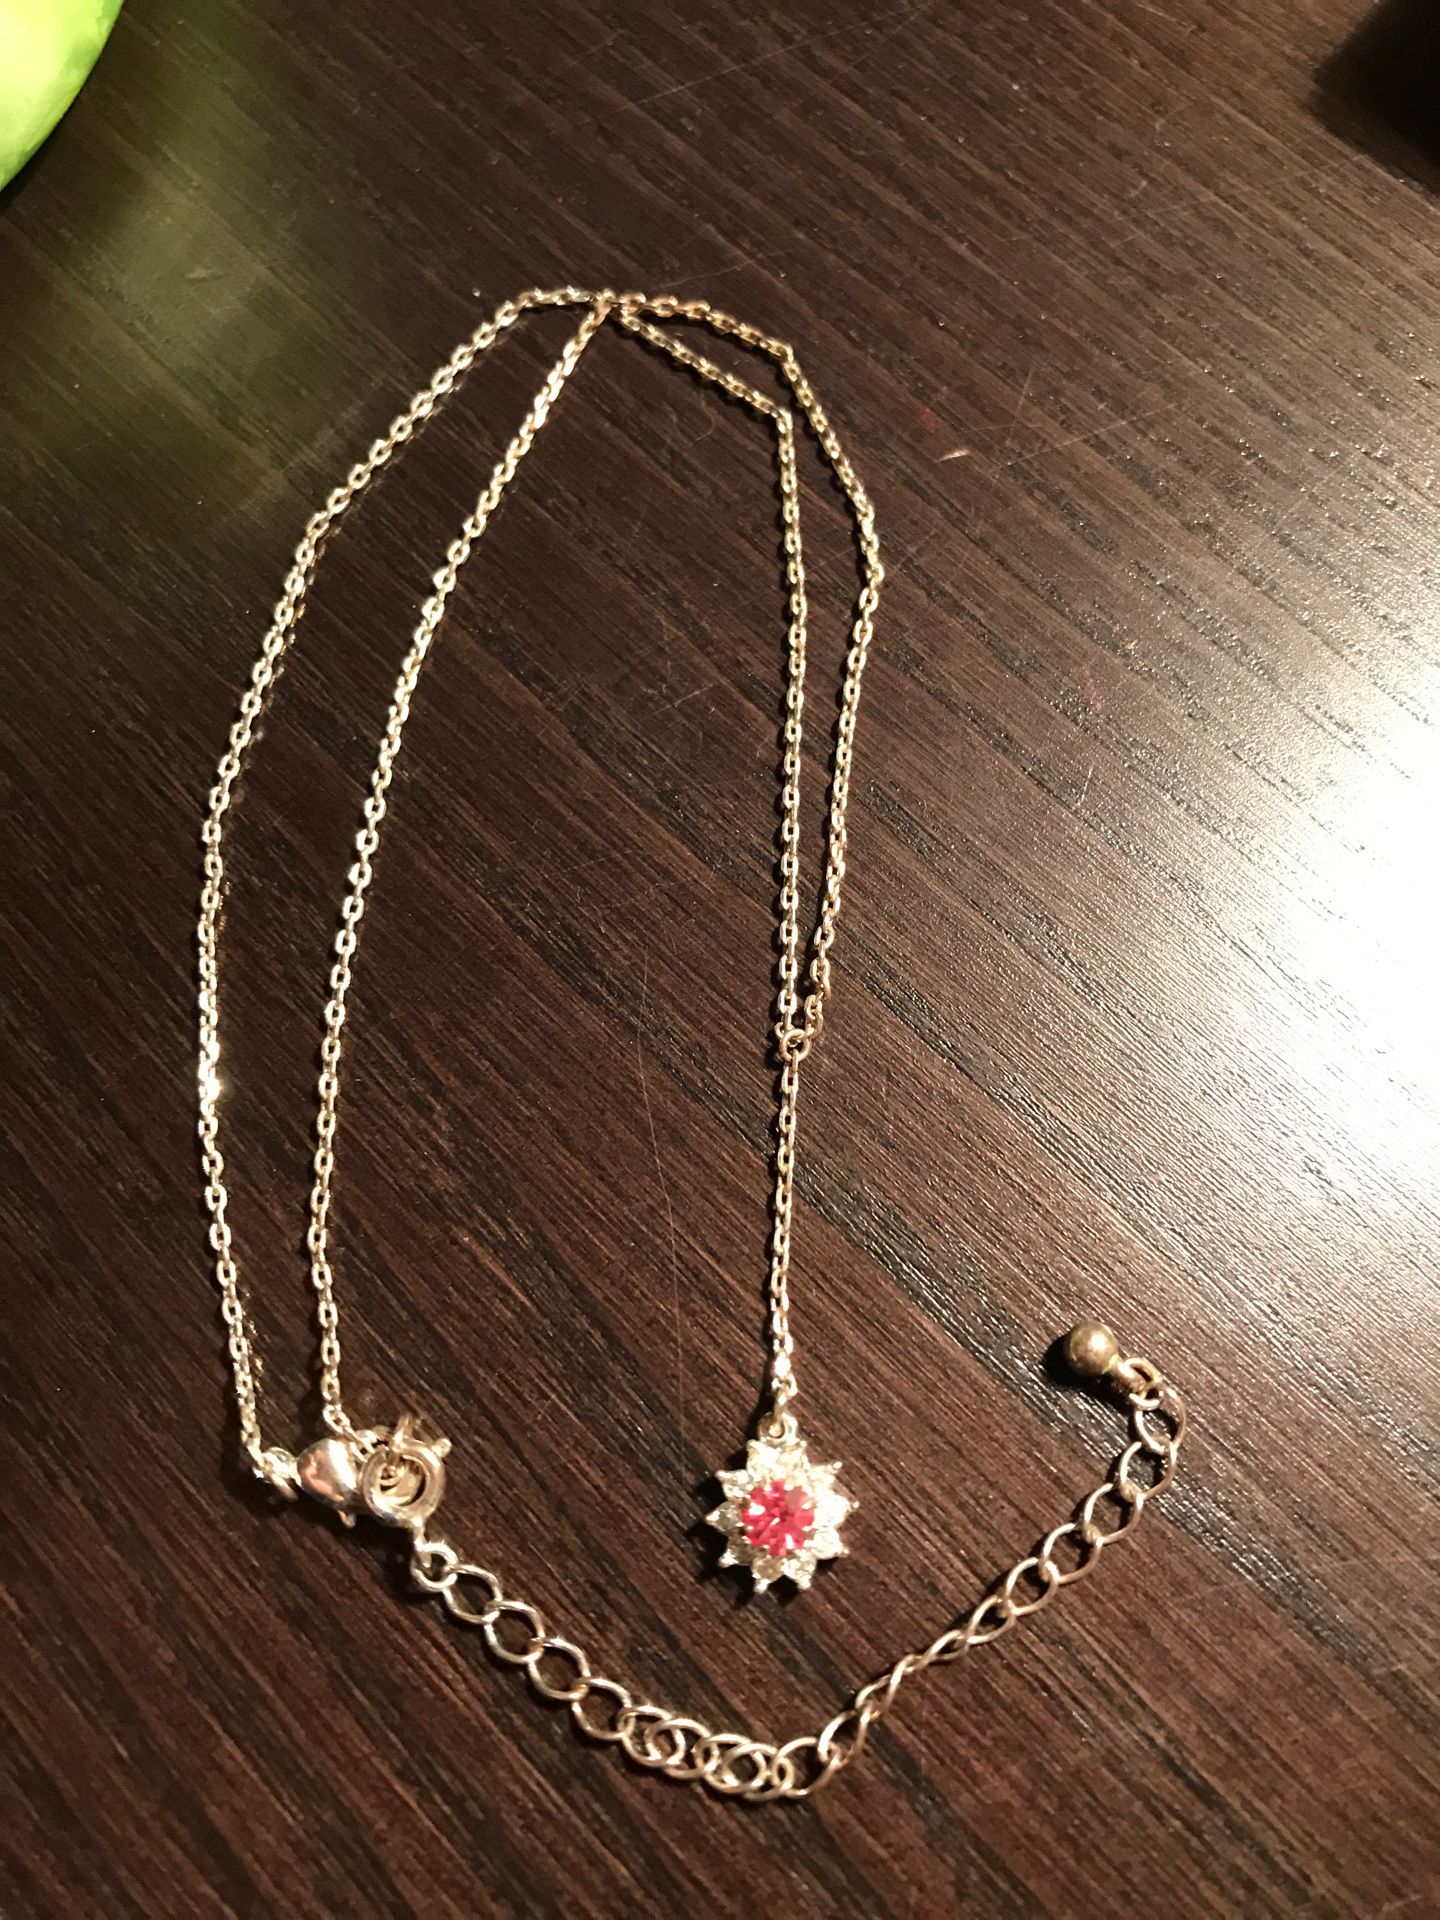 Silver plated pink star necklace from Avon company-$3